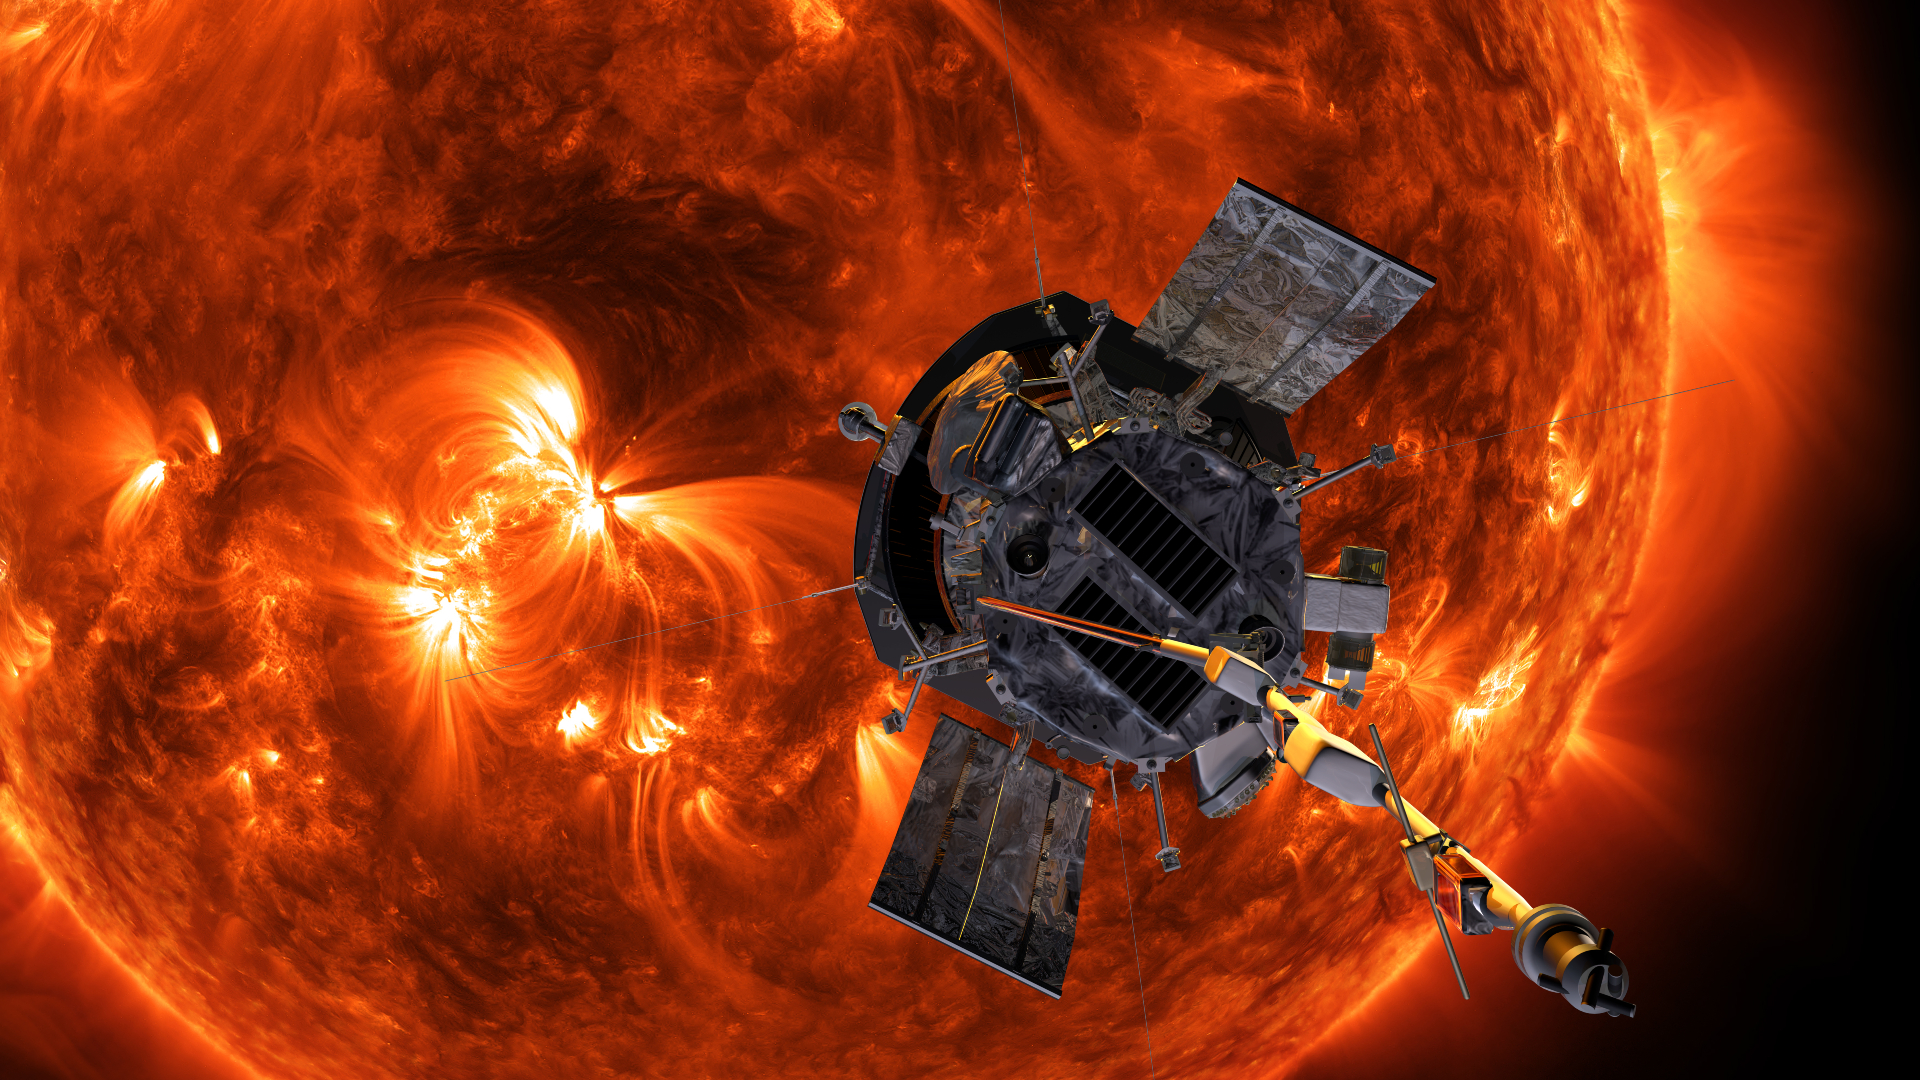 Illustration of the Parker Solar Probe and the sun.